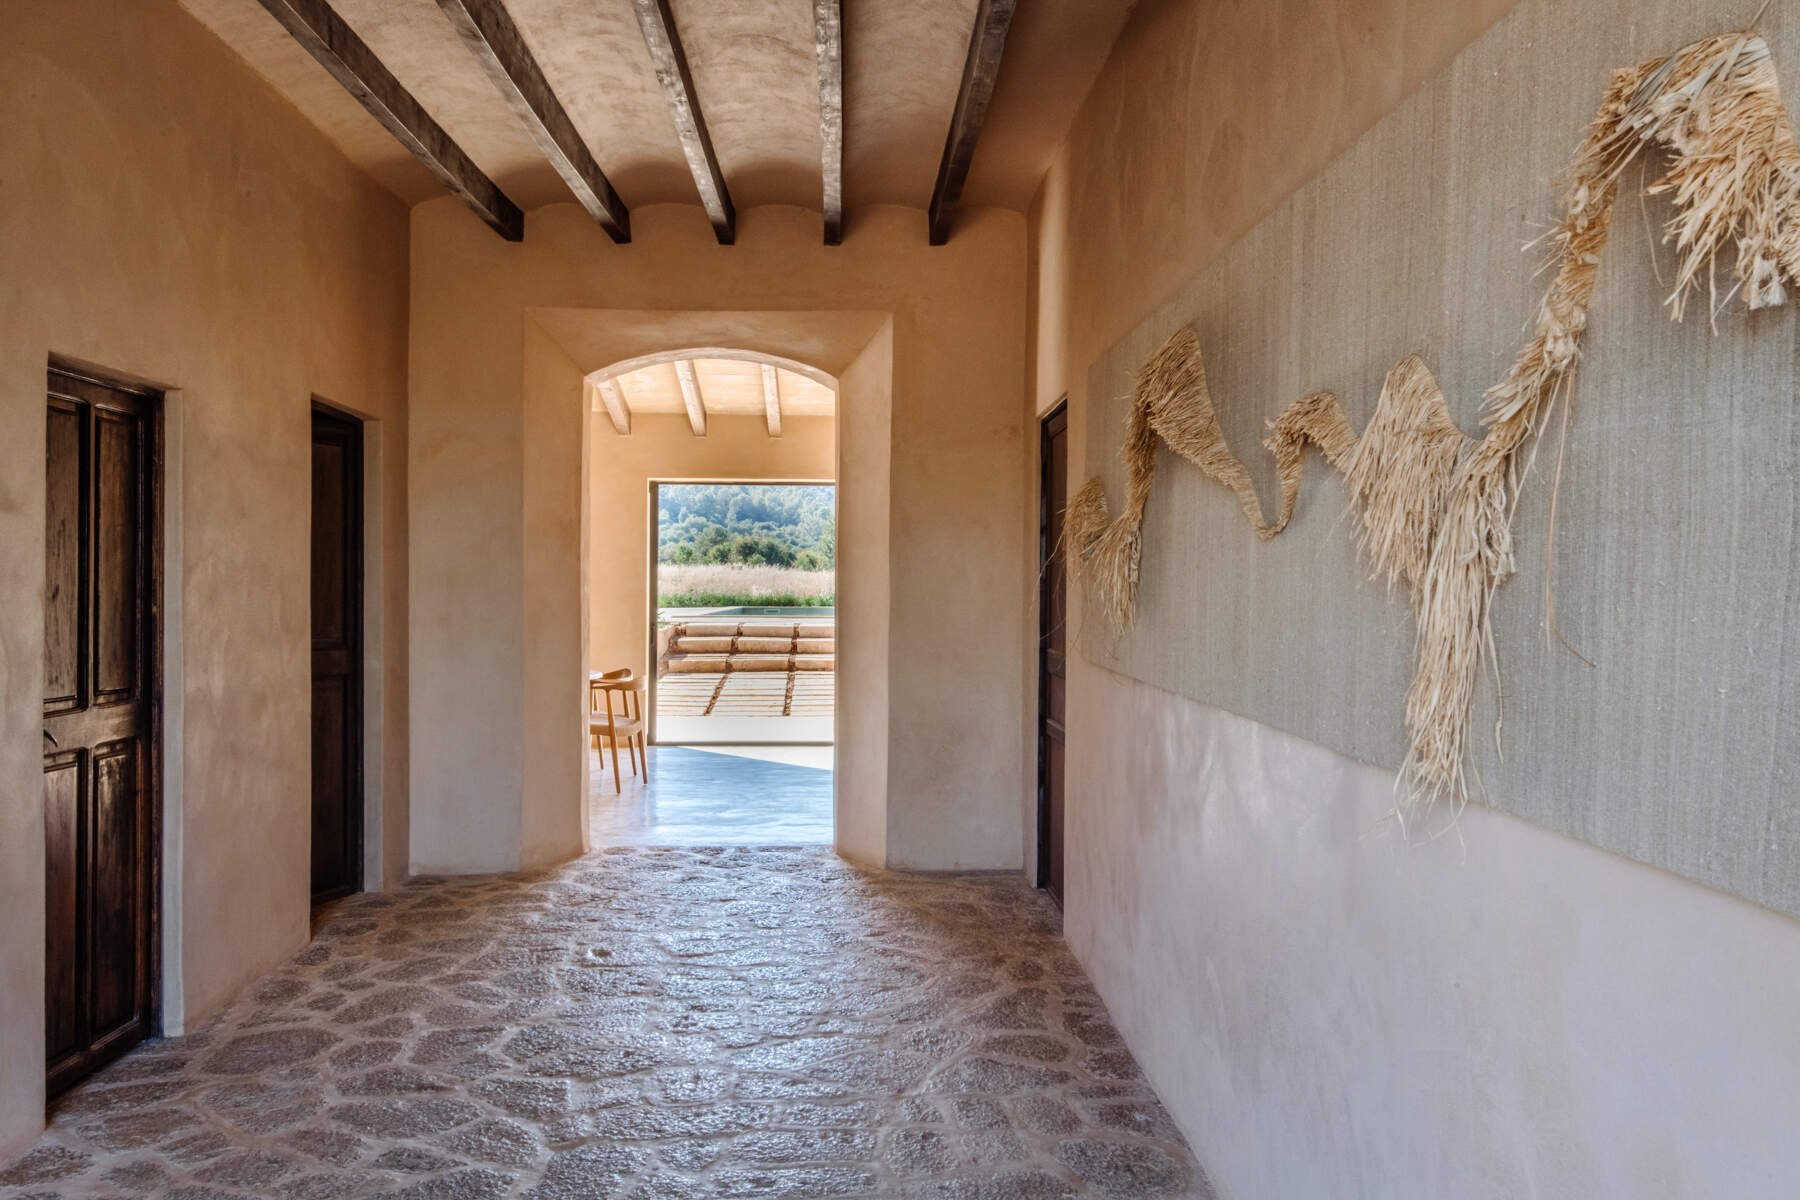 Francis York Le Collectionist Luxury Villa Rental in the Heart of Mallorca  8.jpg